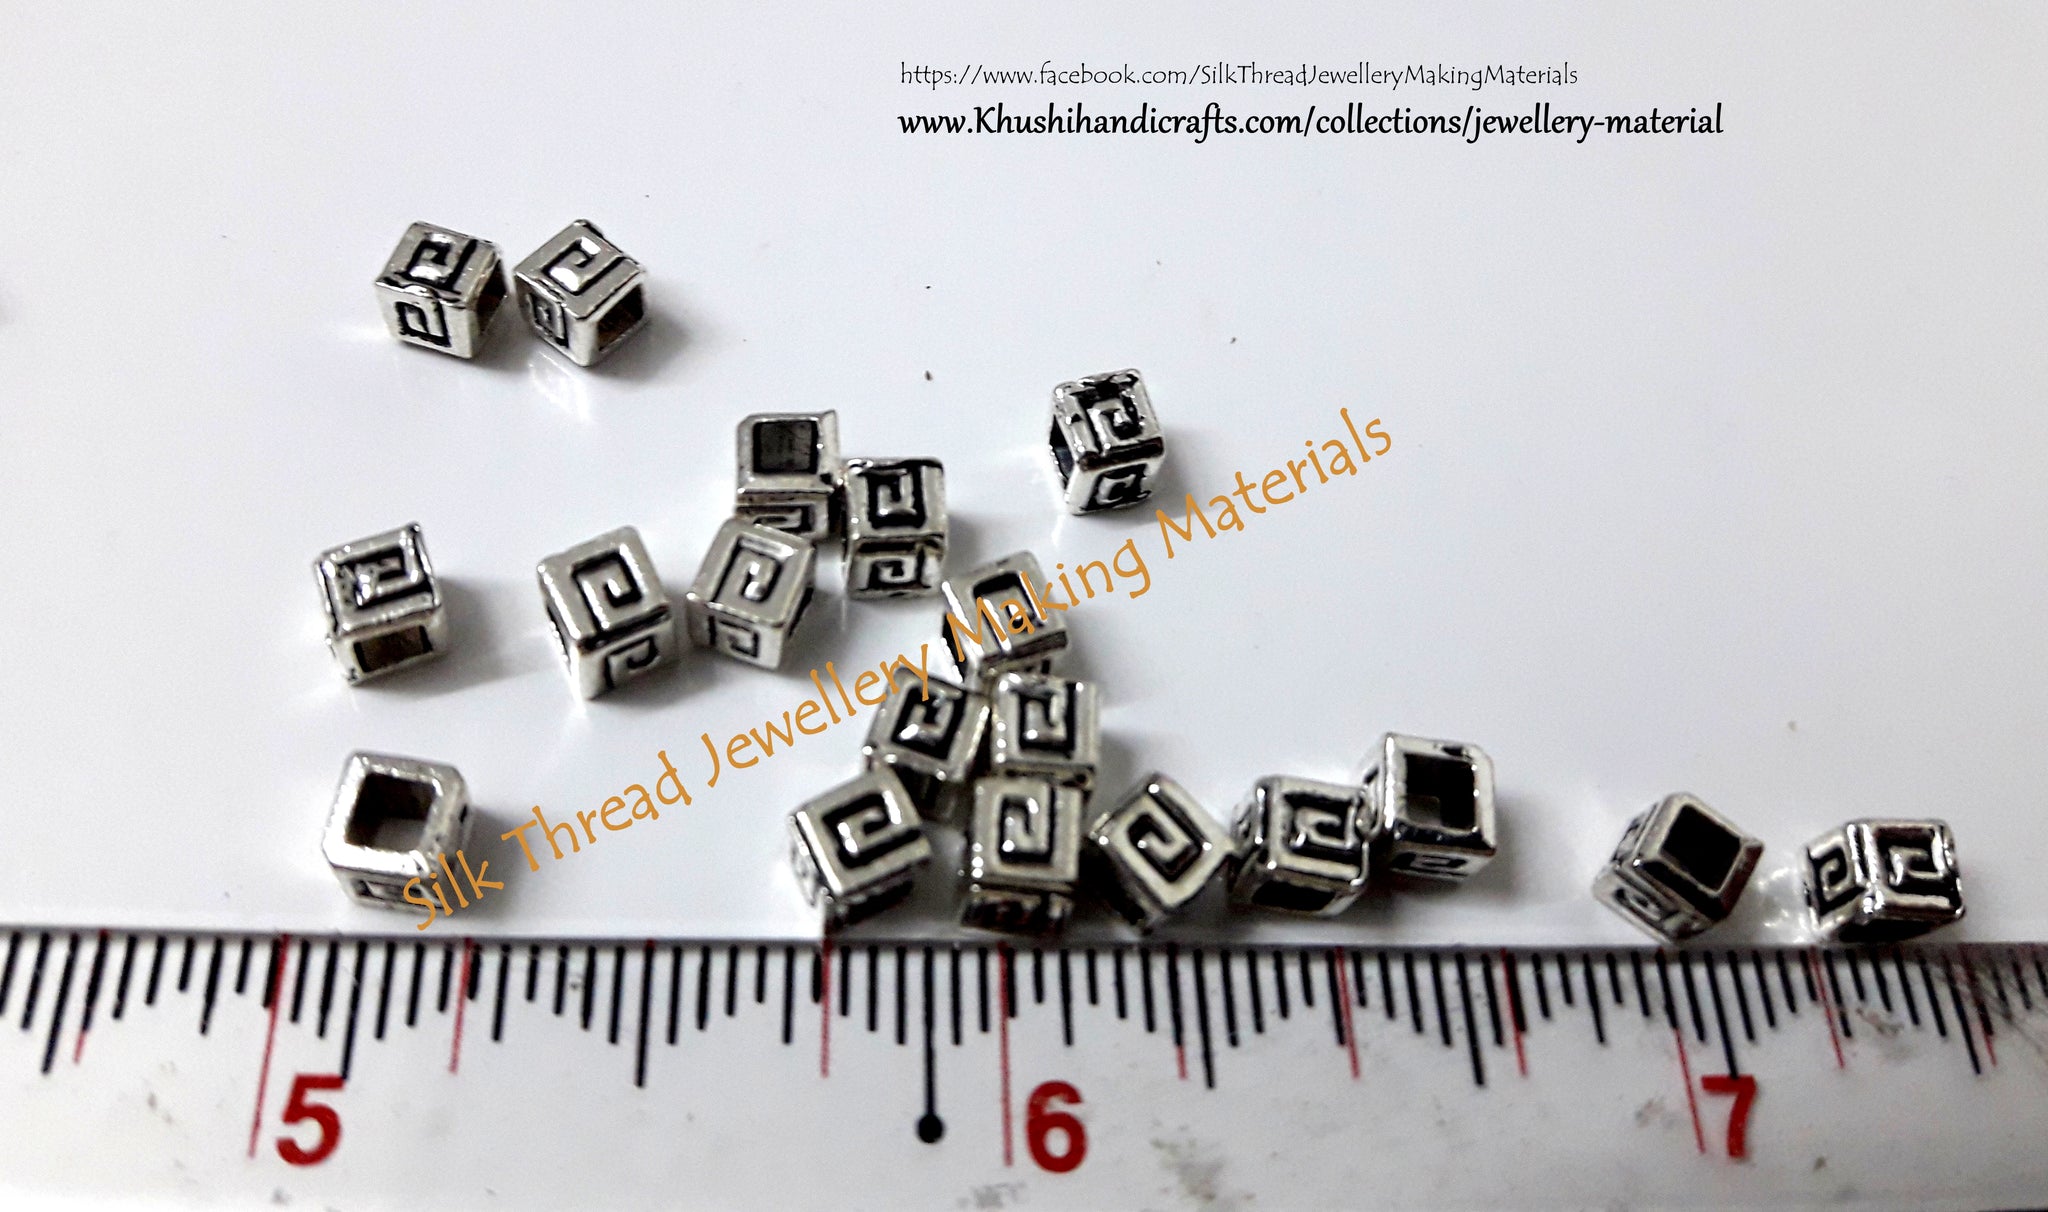 Buy Rectangular spacer beads online in India | Jewelry Making Materials